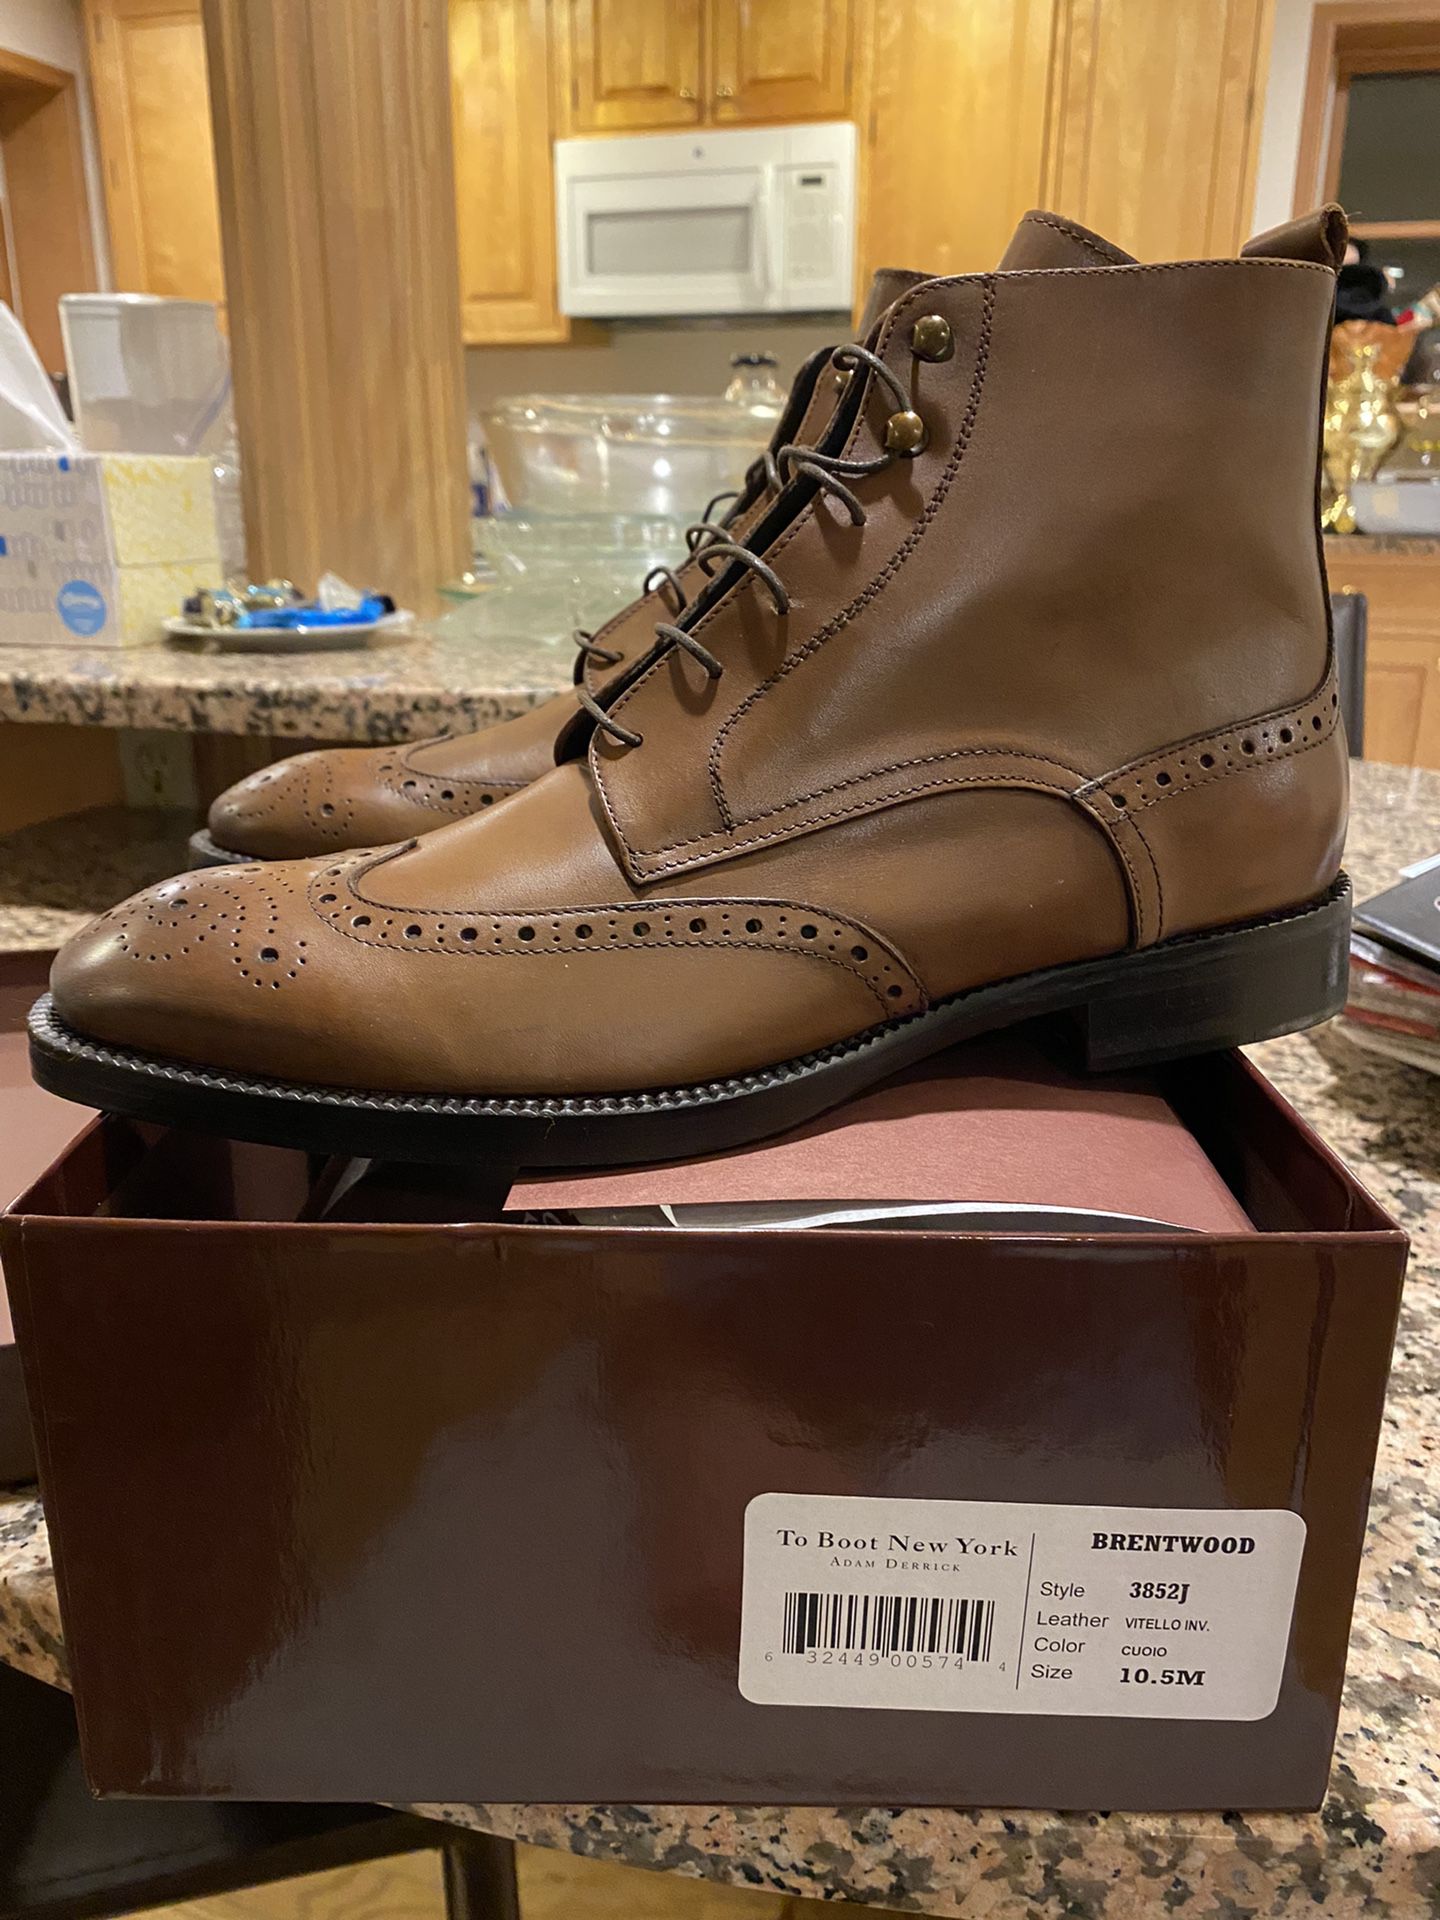 To Boot New York Adam Derrick Brentwood Wingtip Boots Size 10.5 Brand New In Box